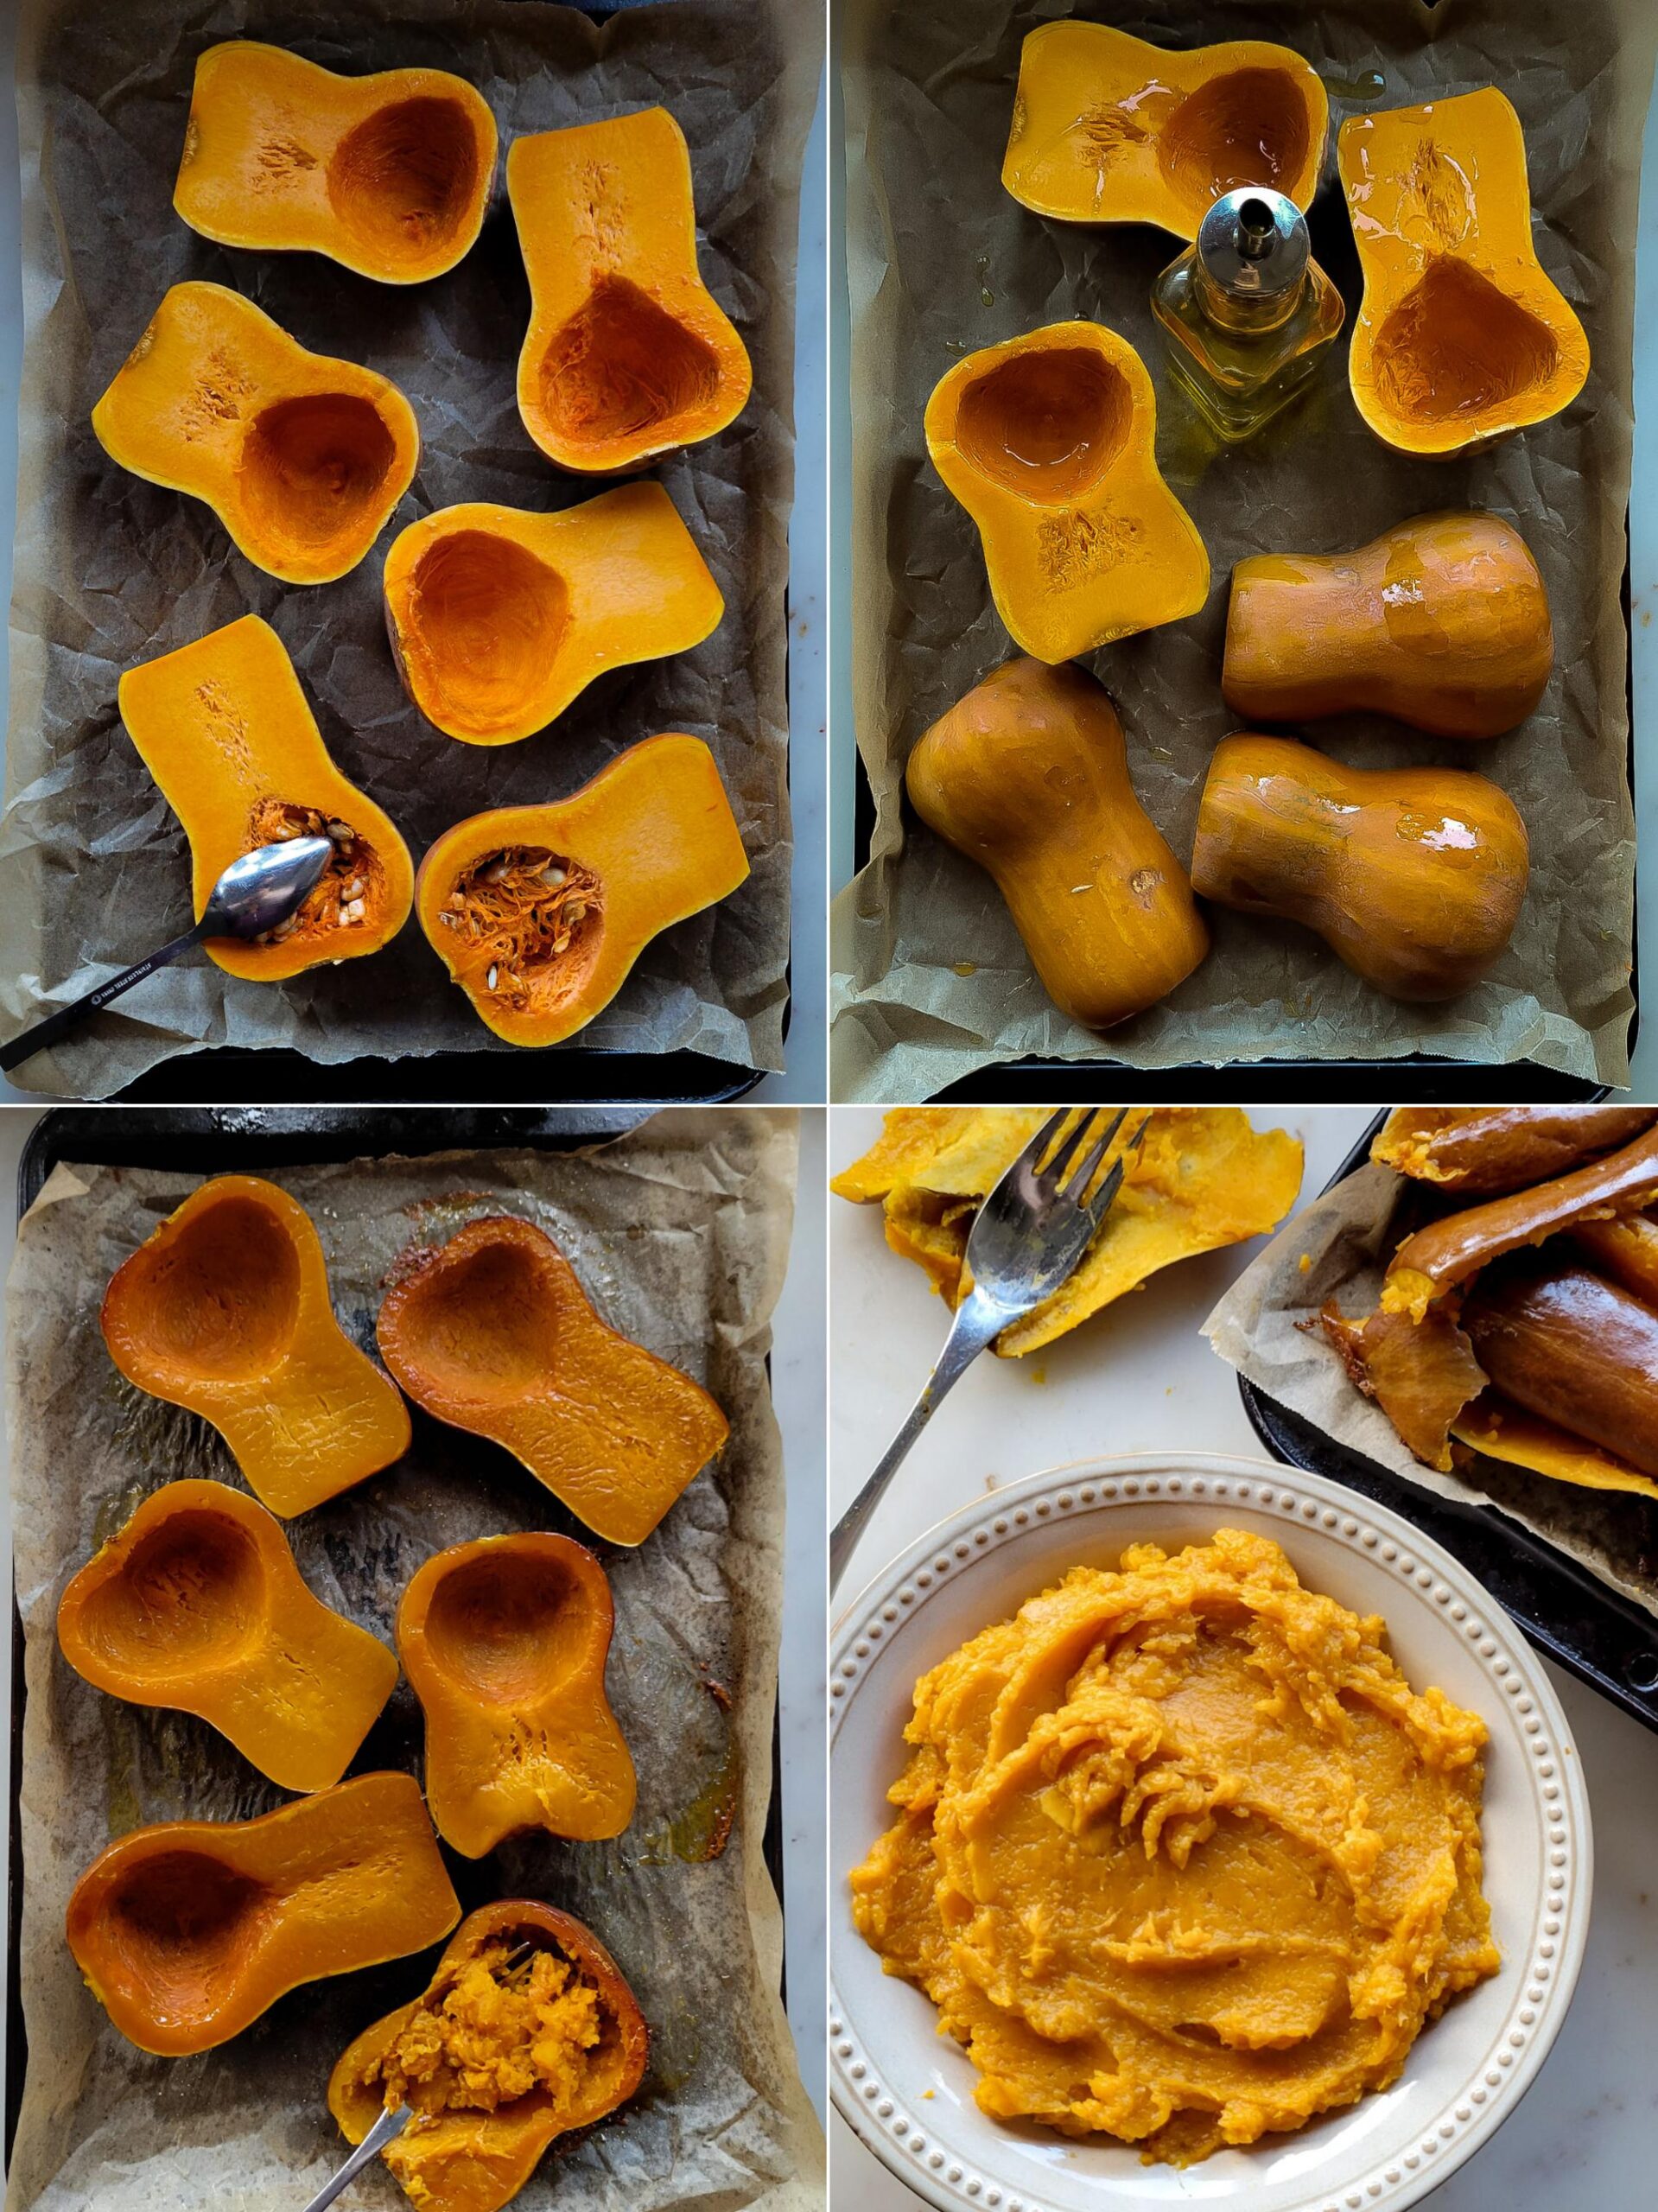 Collage showing how to roast off honeynut squash to make purée.